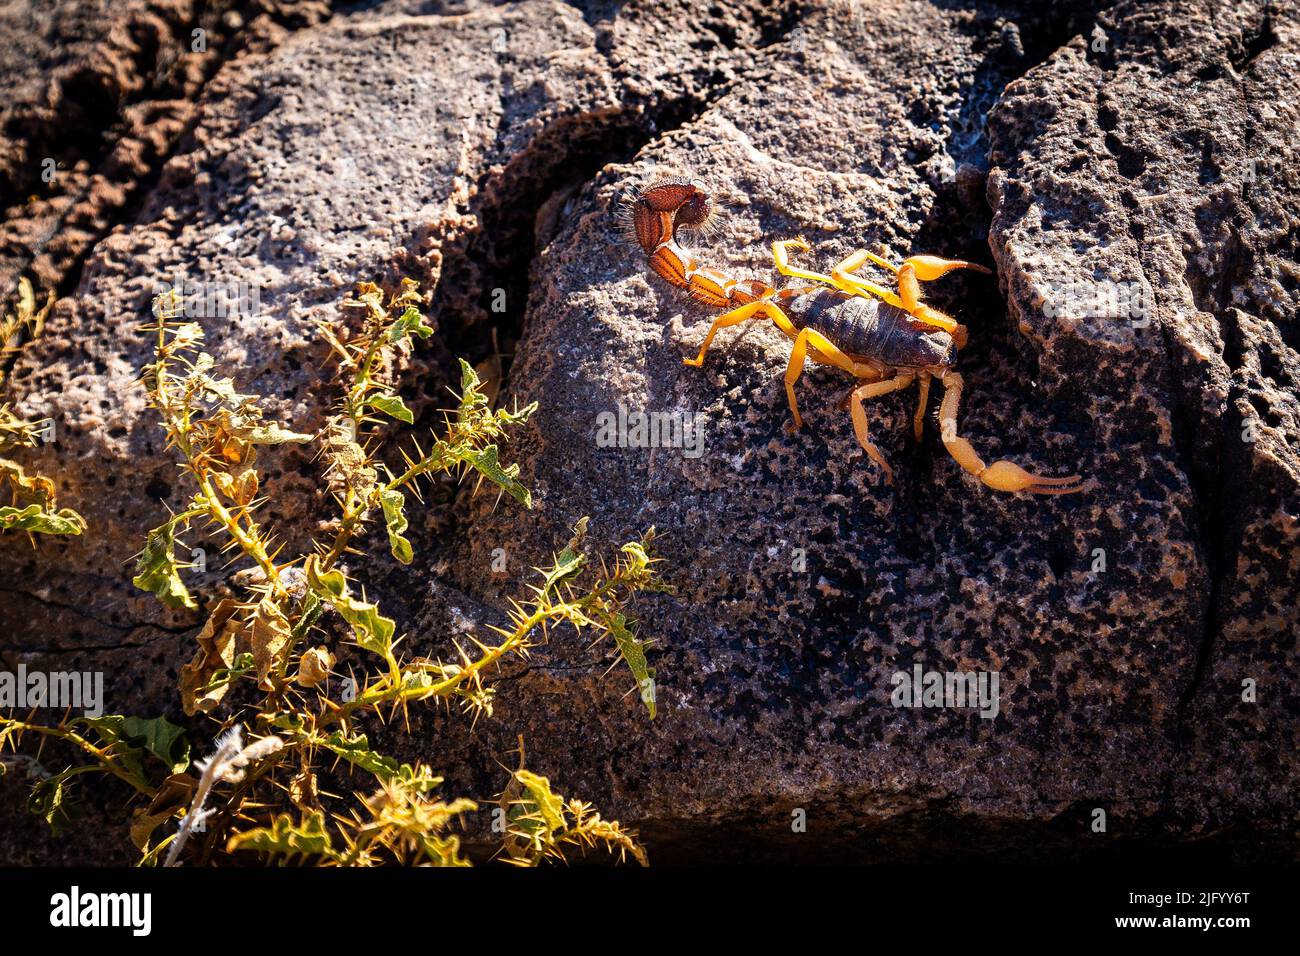 A closeup shot of a black hairy thick-tailed scorpion on the rock, Fishriver Canyon, Namibia Stock Photo